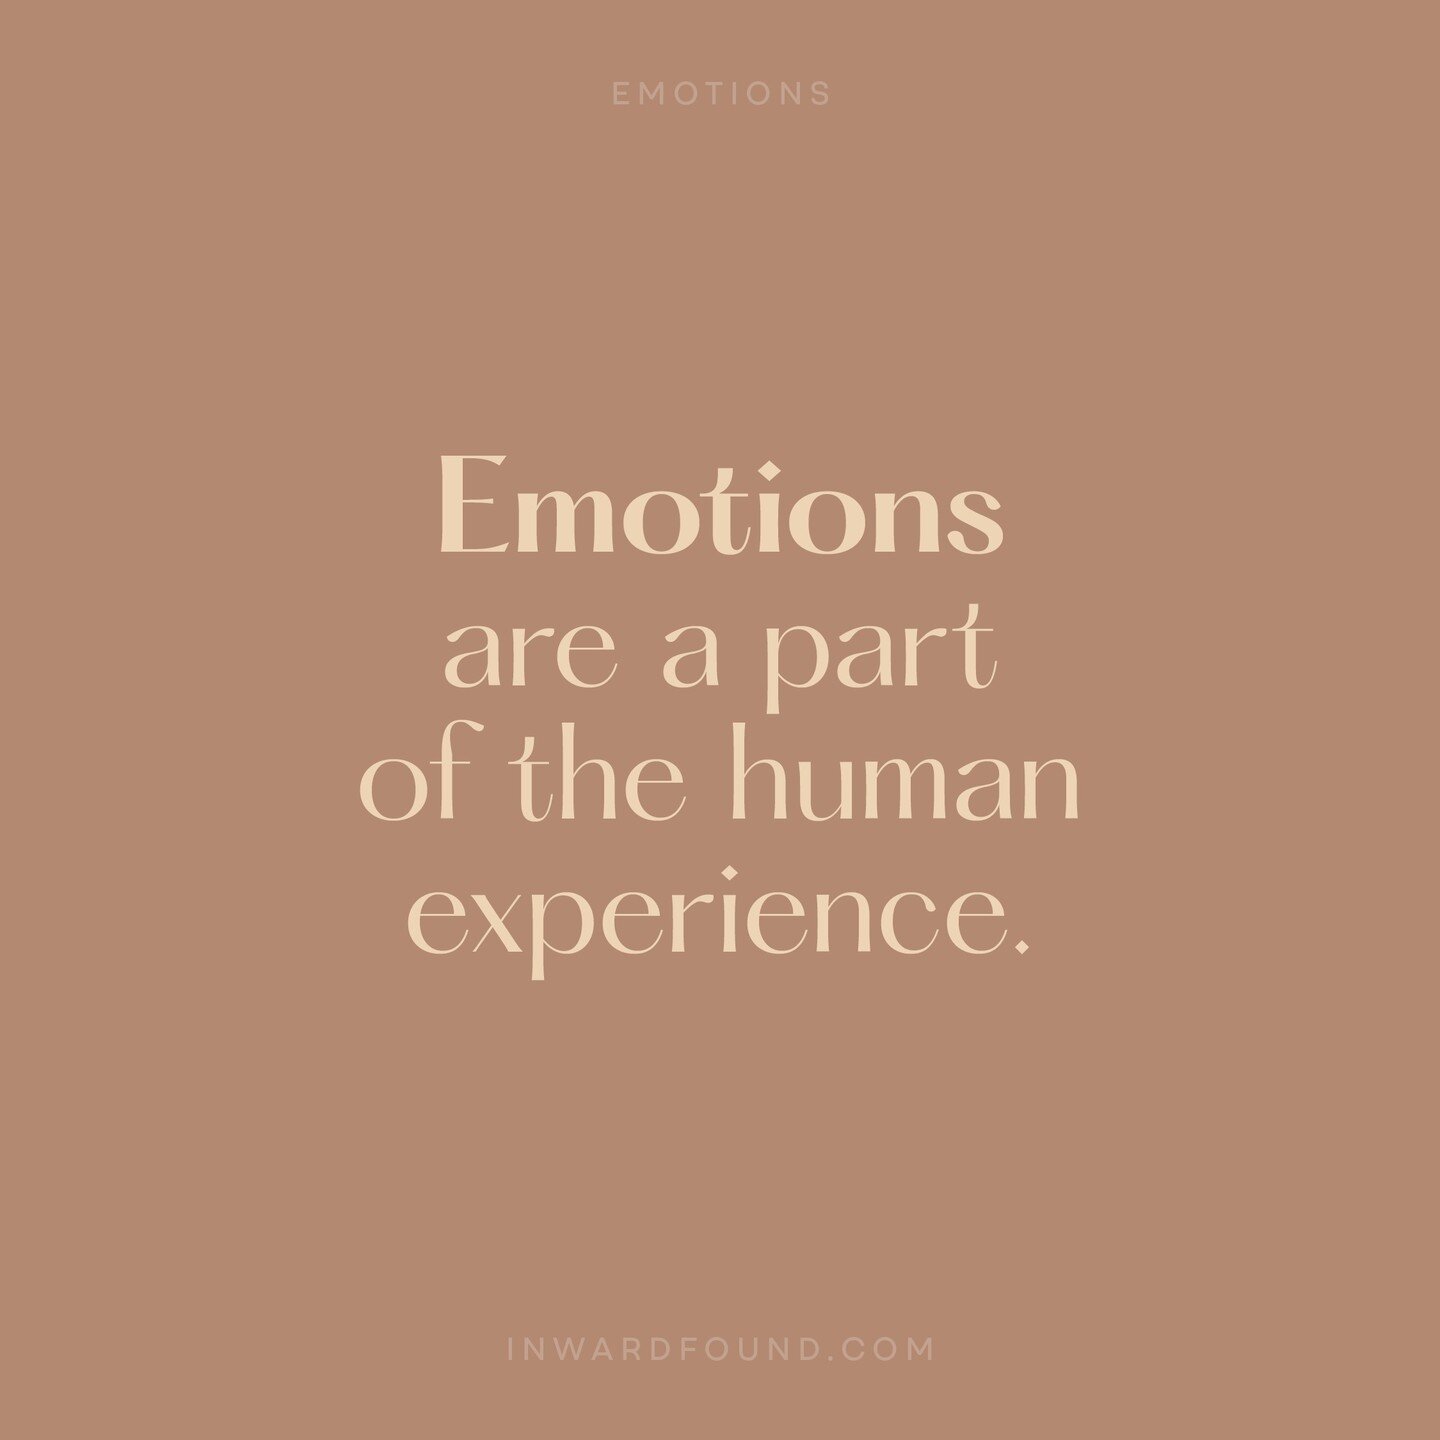 Despite what you may have been taught, experiencing ALL emotions is a part of being human. 

#inwardfound #emotionsarenotyourenemy #understandingemotions #processingemotions #counselling #counsellor #psychotherapy #psychotherapist #therapy #gestalt #